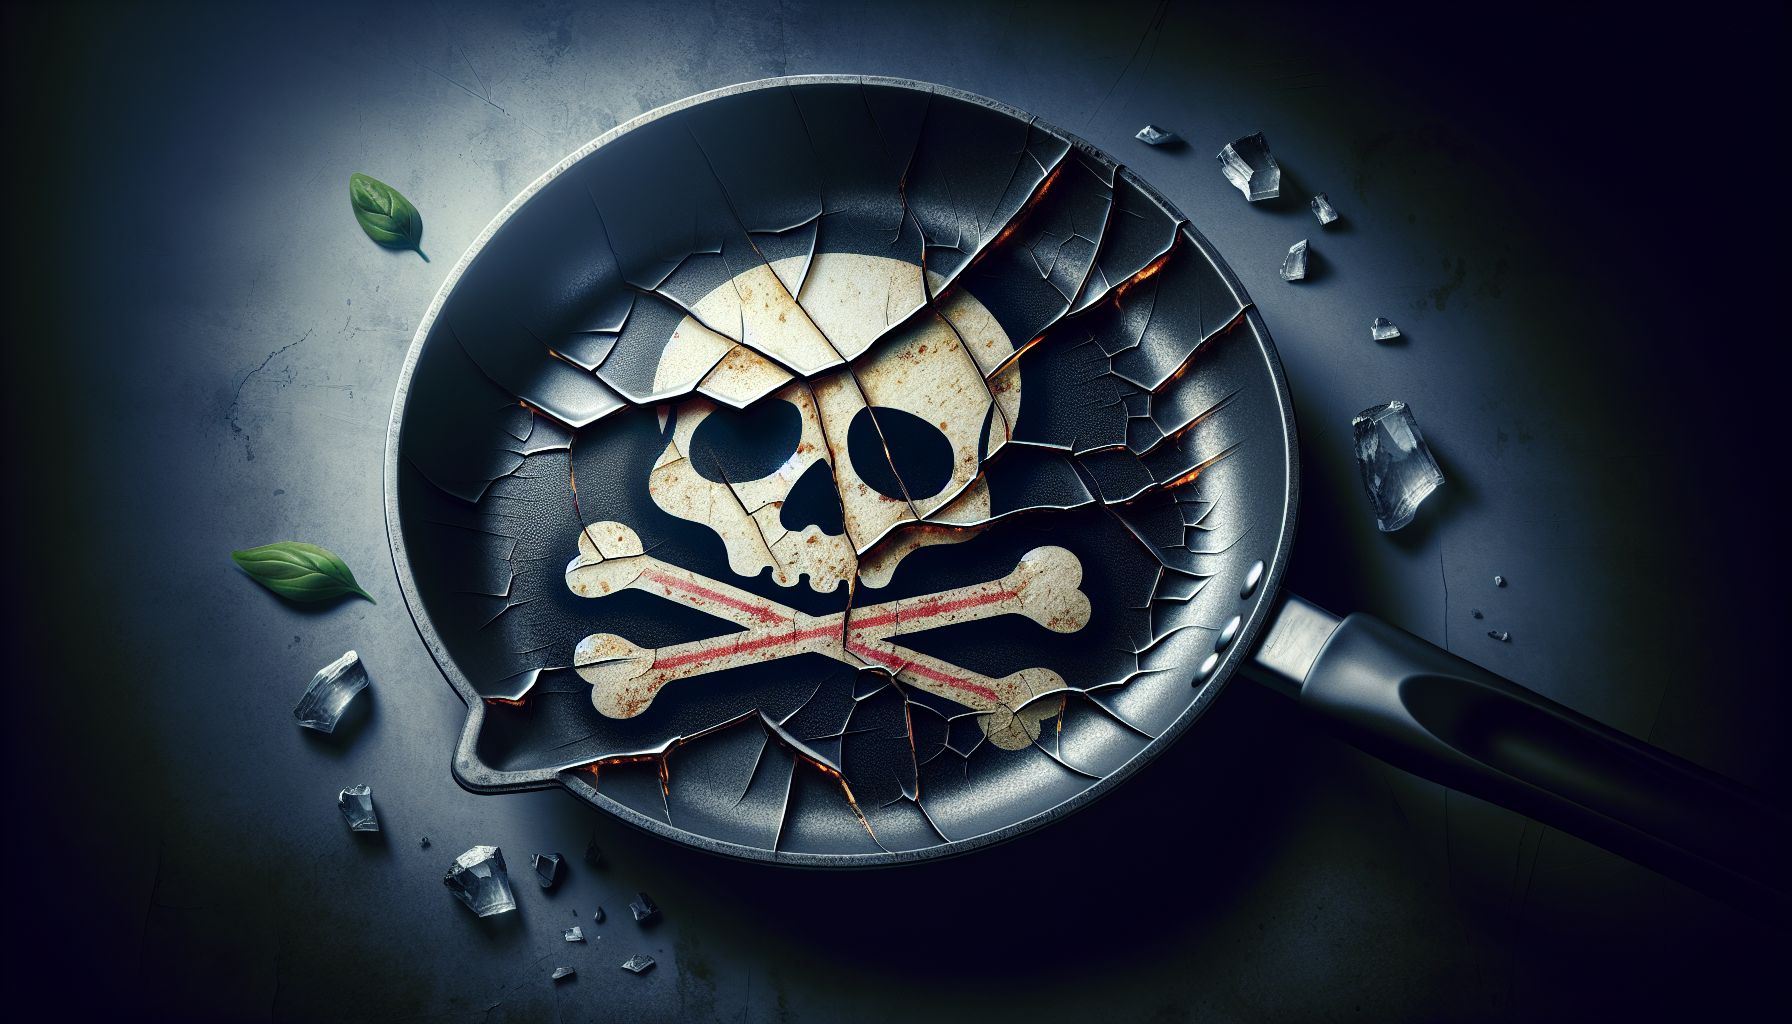 What Pans Have Toxic Chemicals?